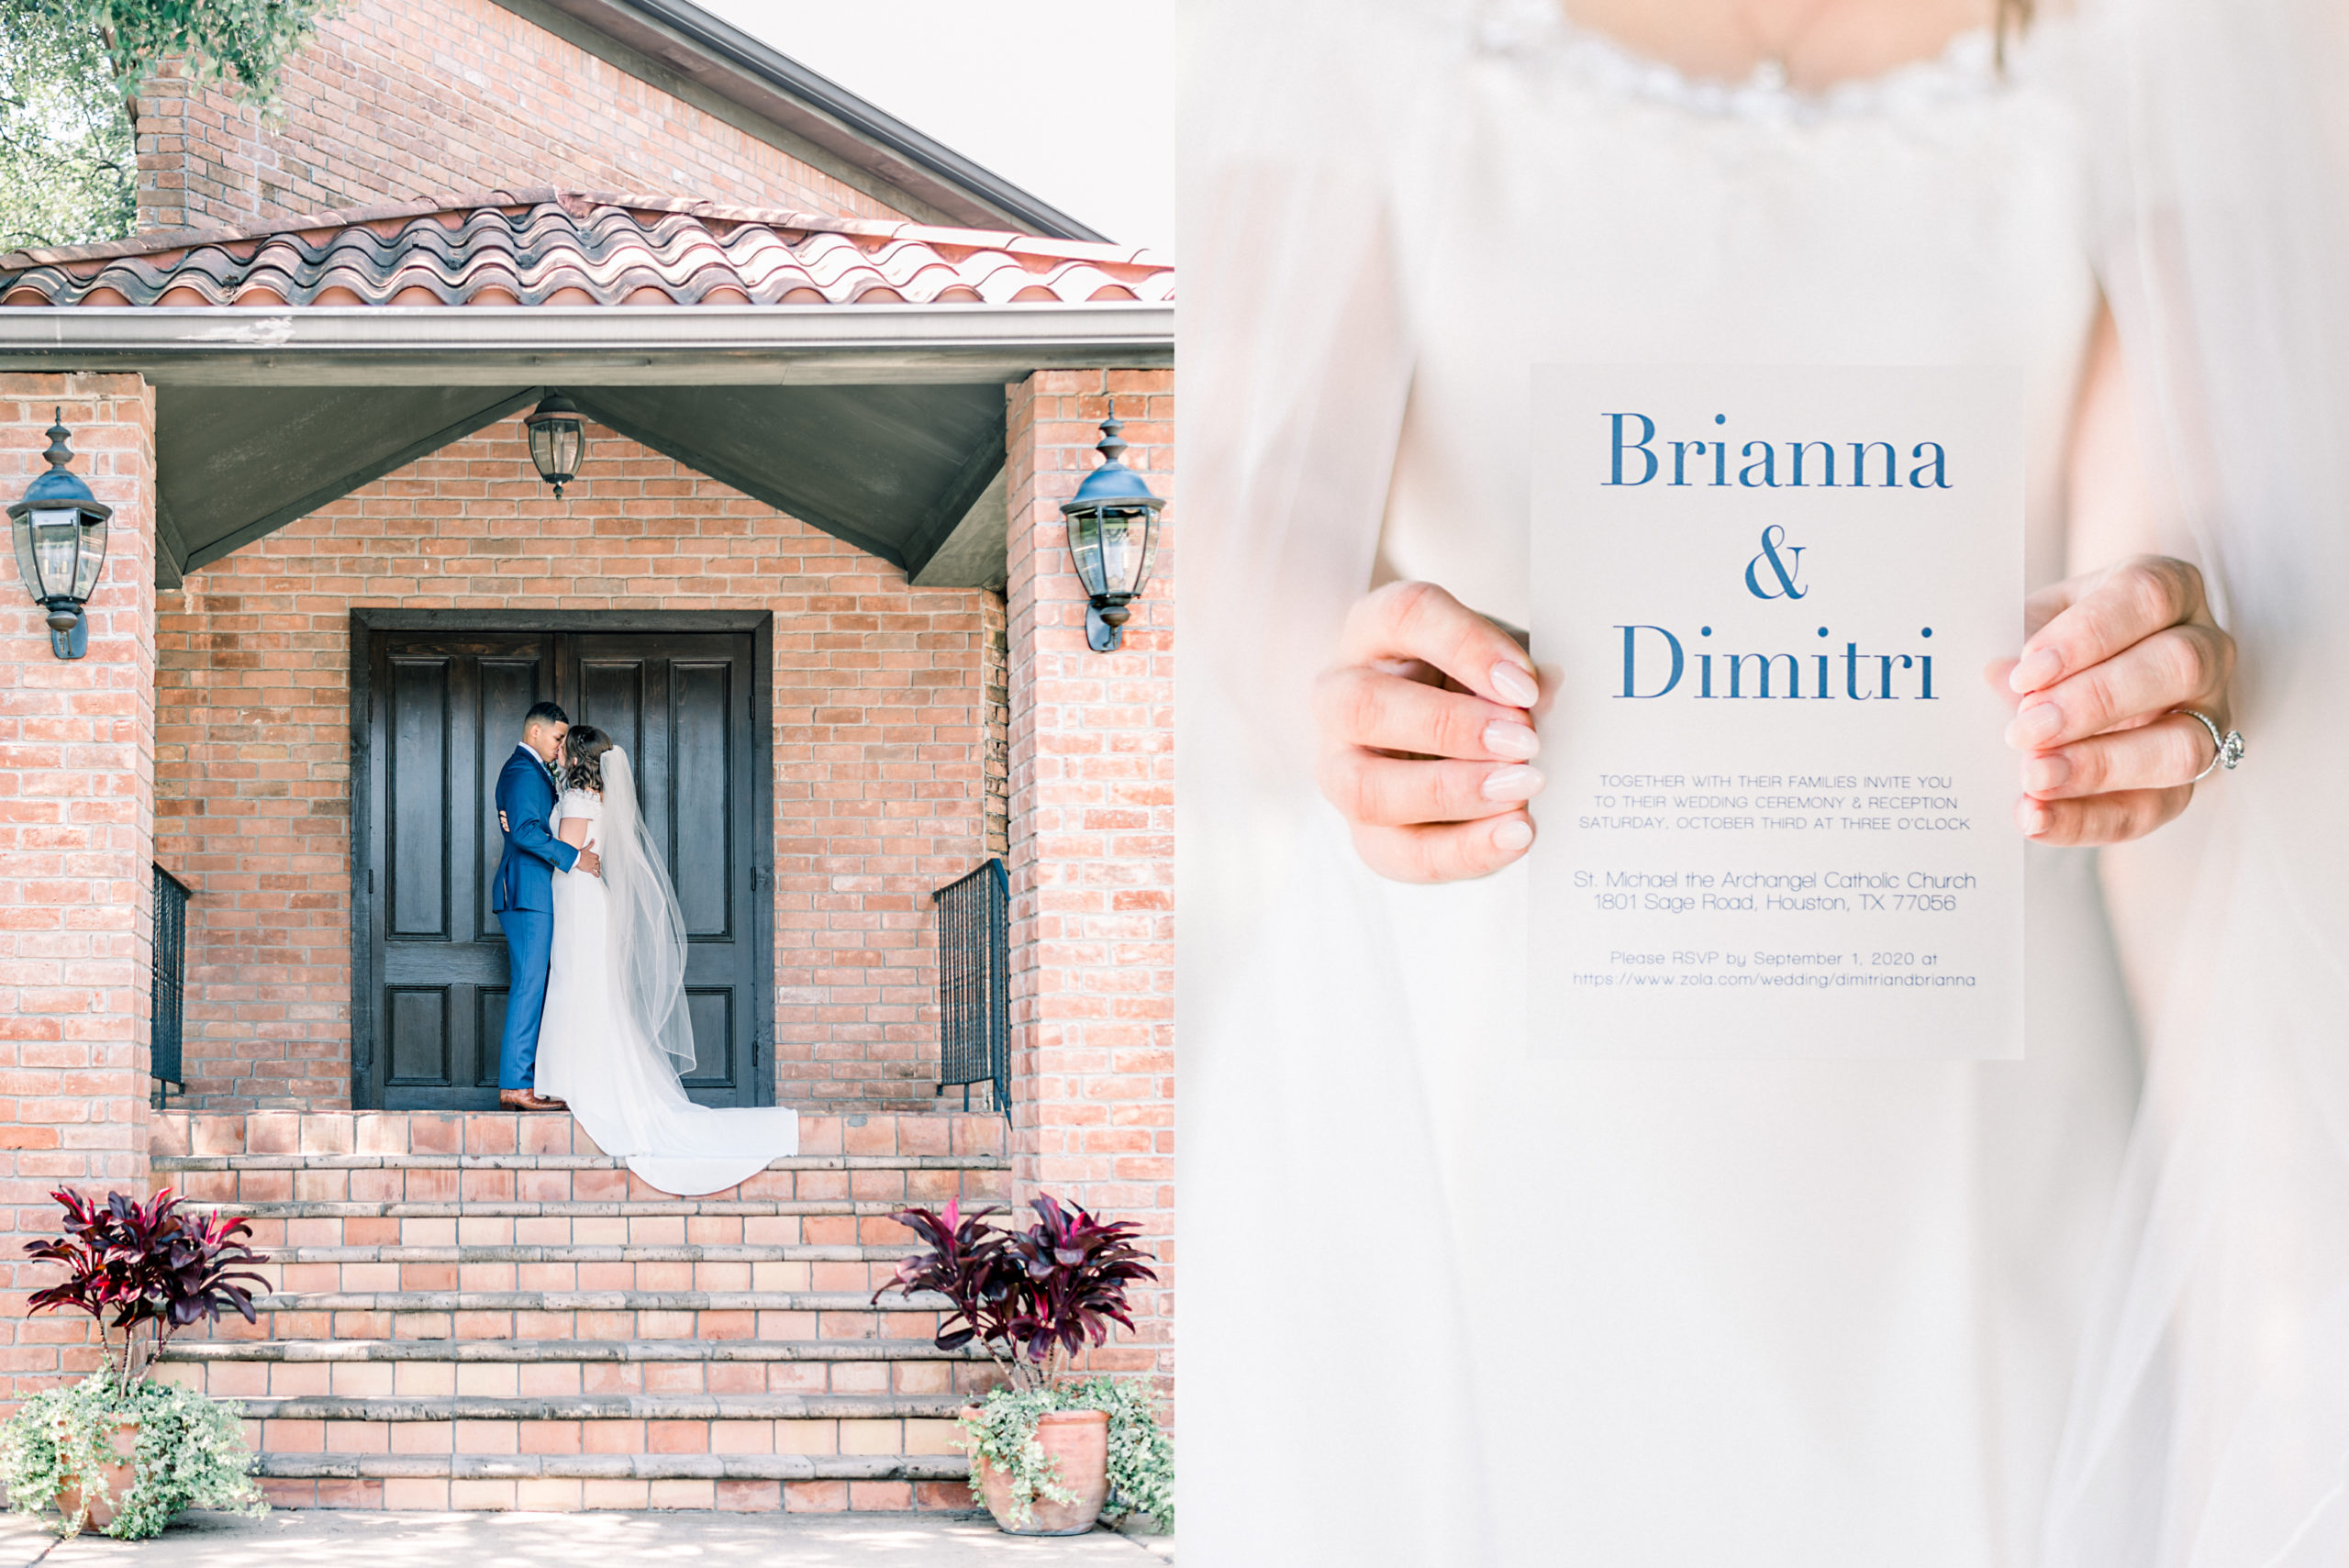 The Gallery Wedding | Brianna & Dimitri | Jessica Lucile Photography